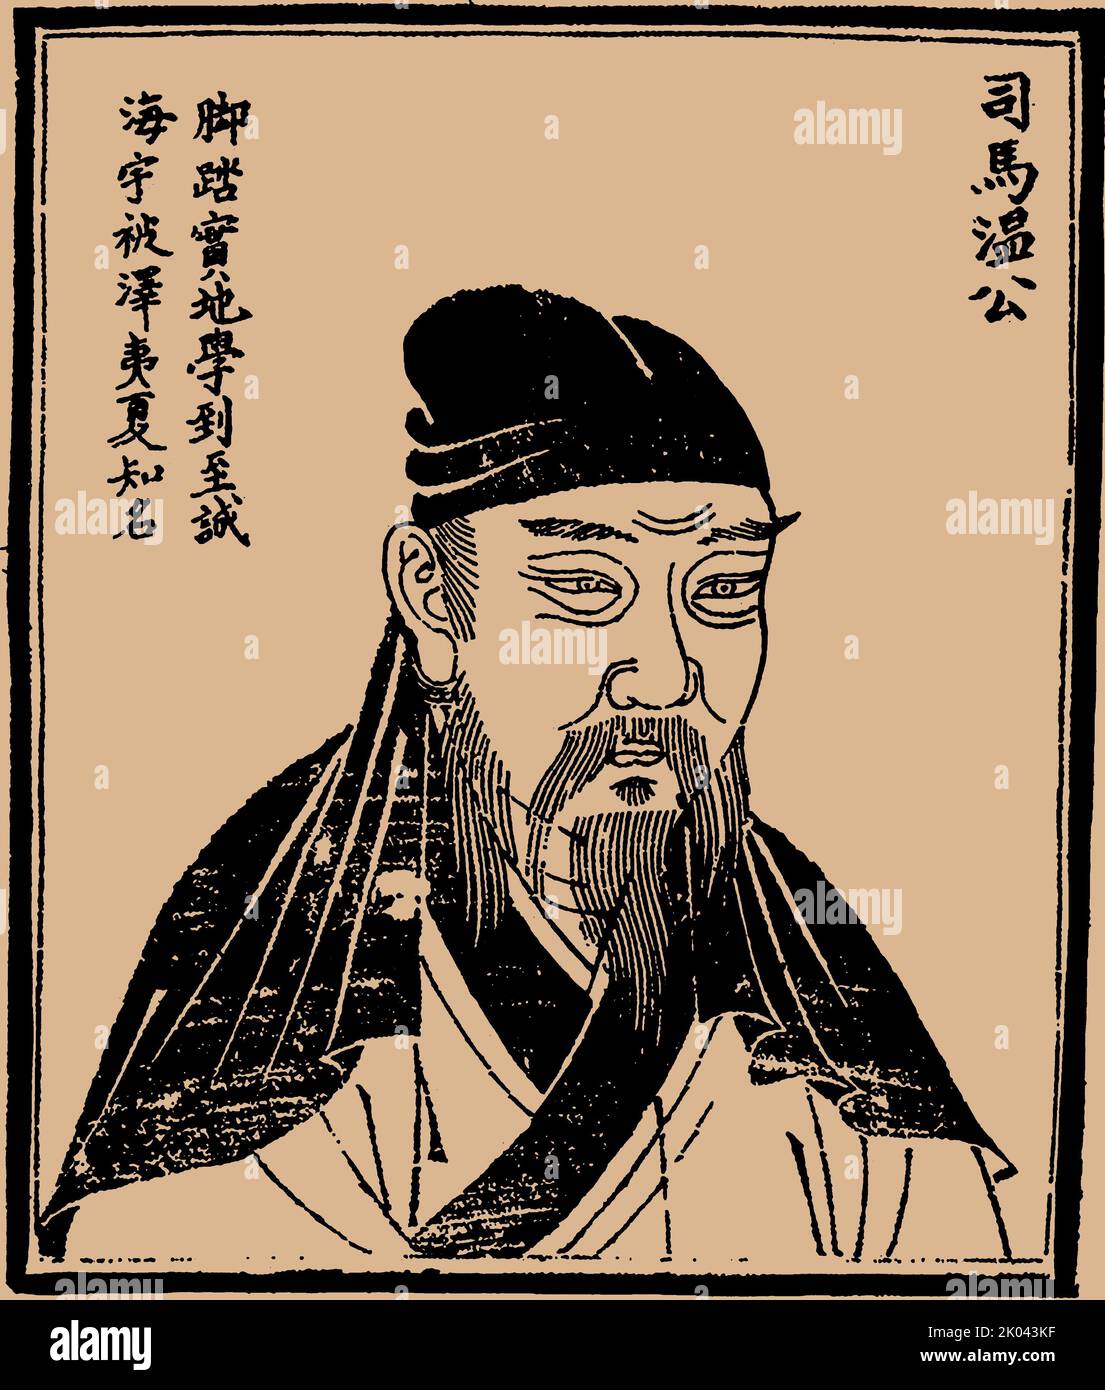 Sima Guang (1019-1086), historian, scholar, and high chancellor of the Northen Song Dynasty. Private Collection. Stock Photo